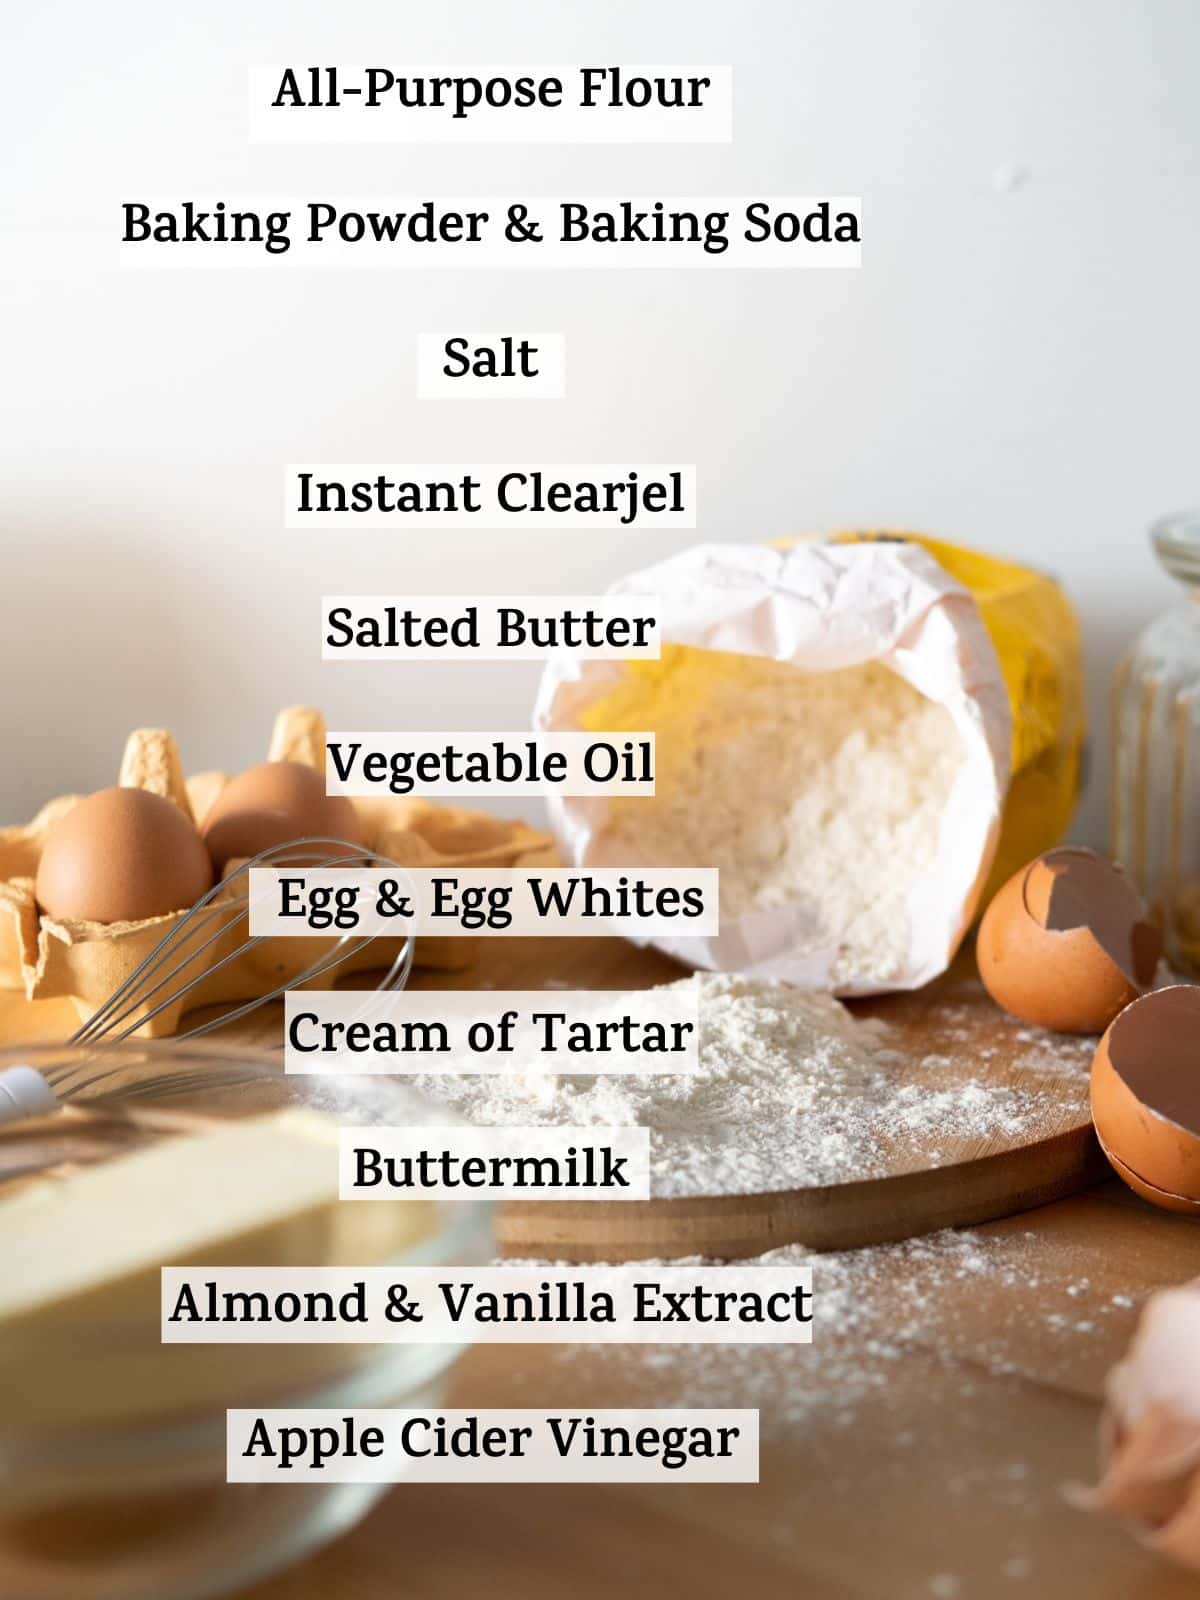 The ingredients for moist vanilla cake recipe listed over a photo of some baking ingredients. The text reads "all-purpose flour, baking powder and baking soda, salt, instant clearjel, sugar, salted butter, vegetable oil, light corn syrup, egg and egg whites, cream of tartar, buttermilk, almond and vanilla extract, apple cider vinegar.